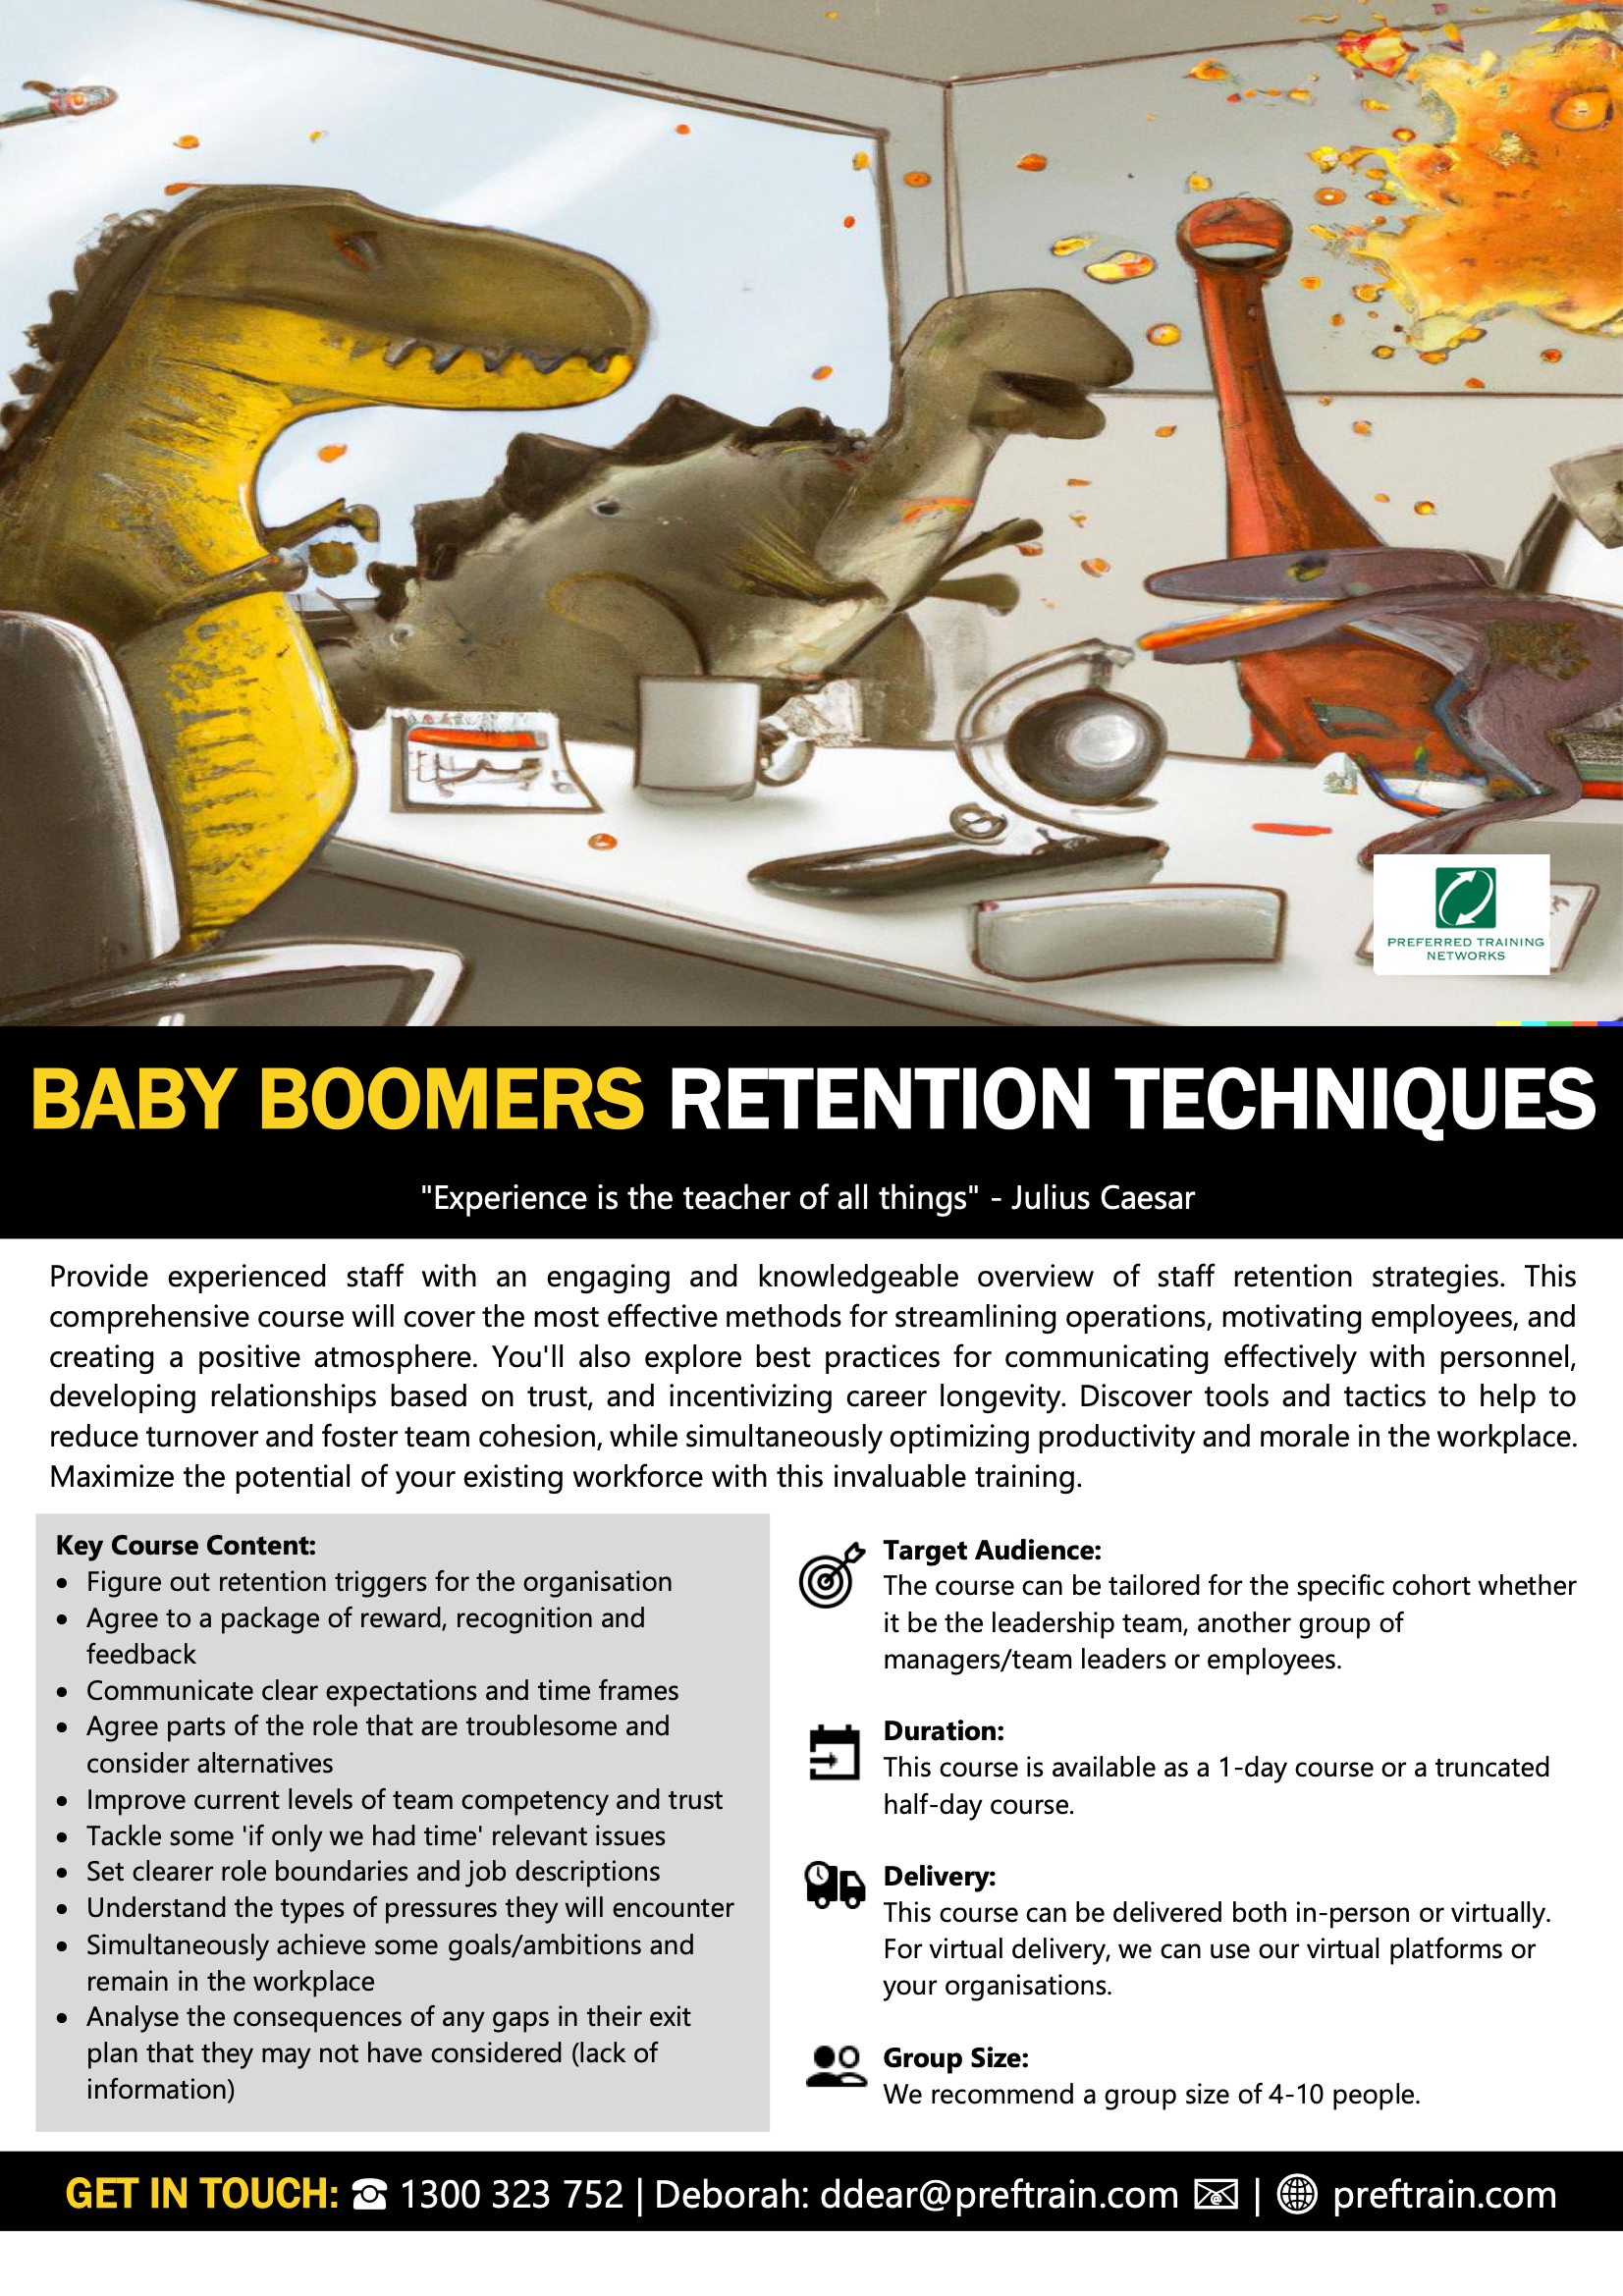 Baby Boomers Retention Techniques